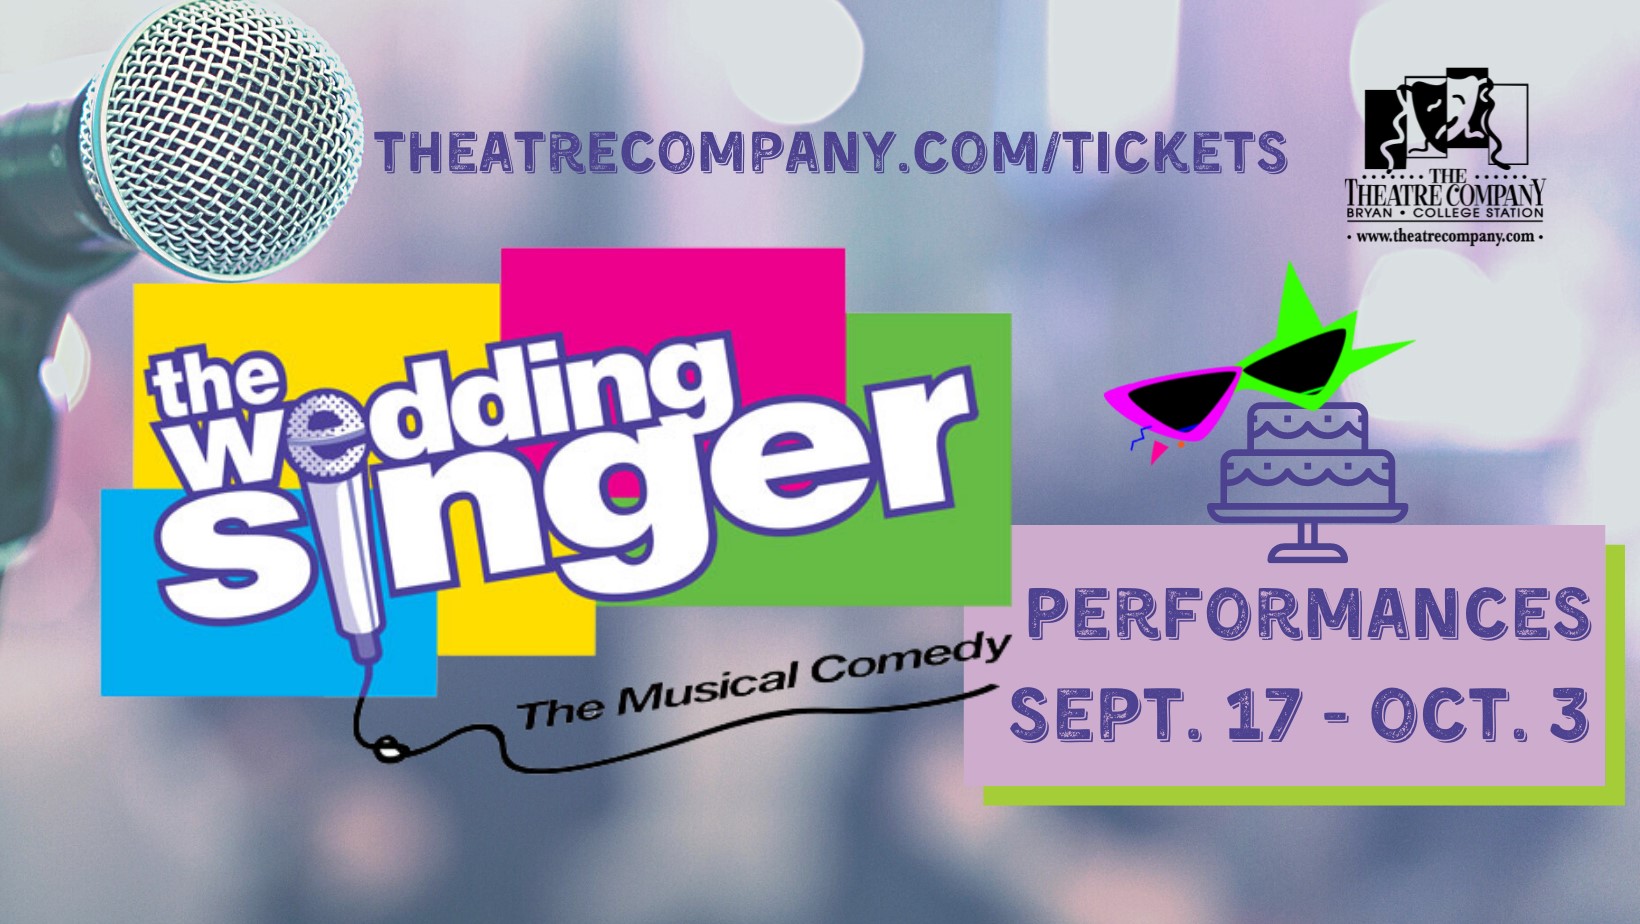 The Wedding Singer by The Theatre Company